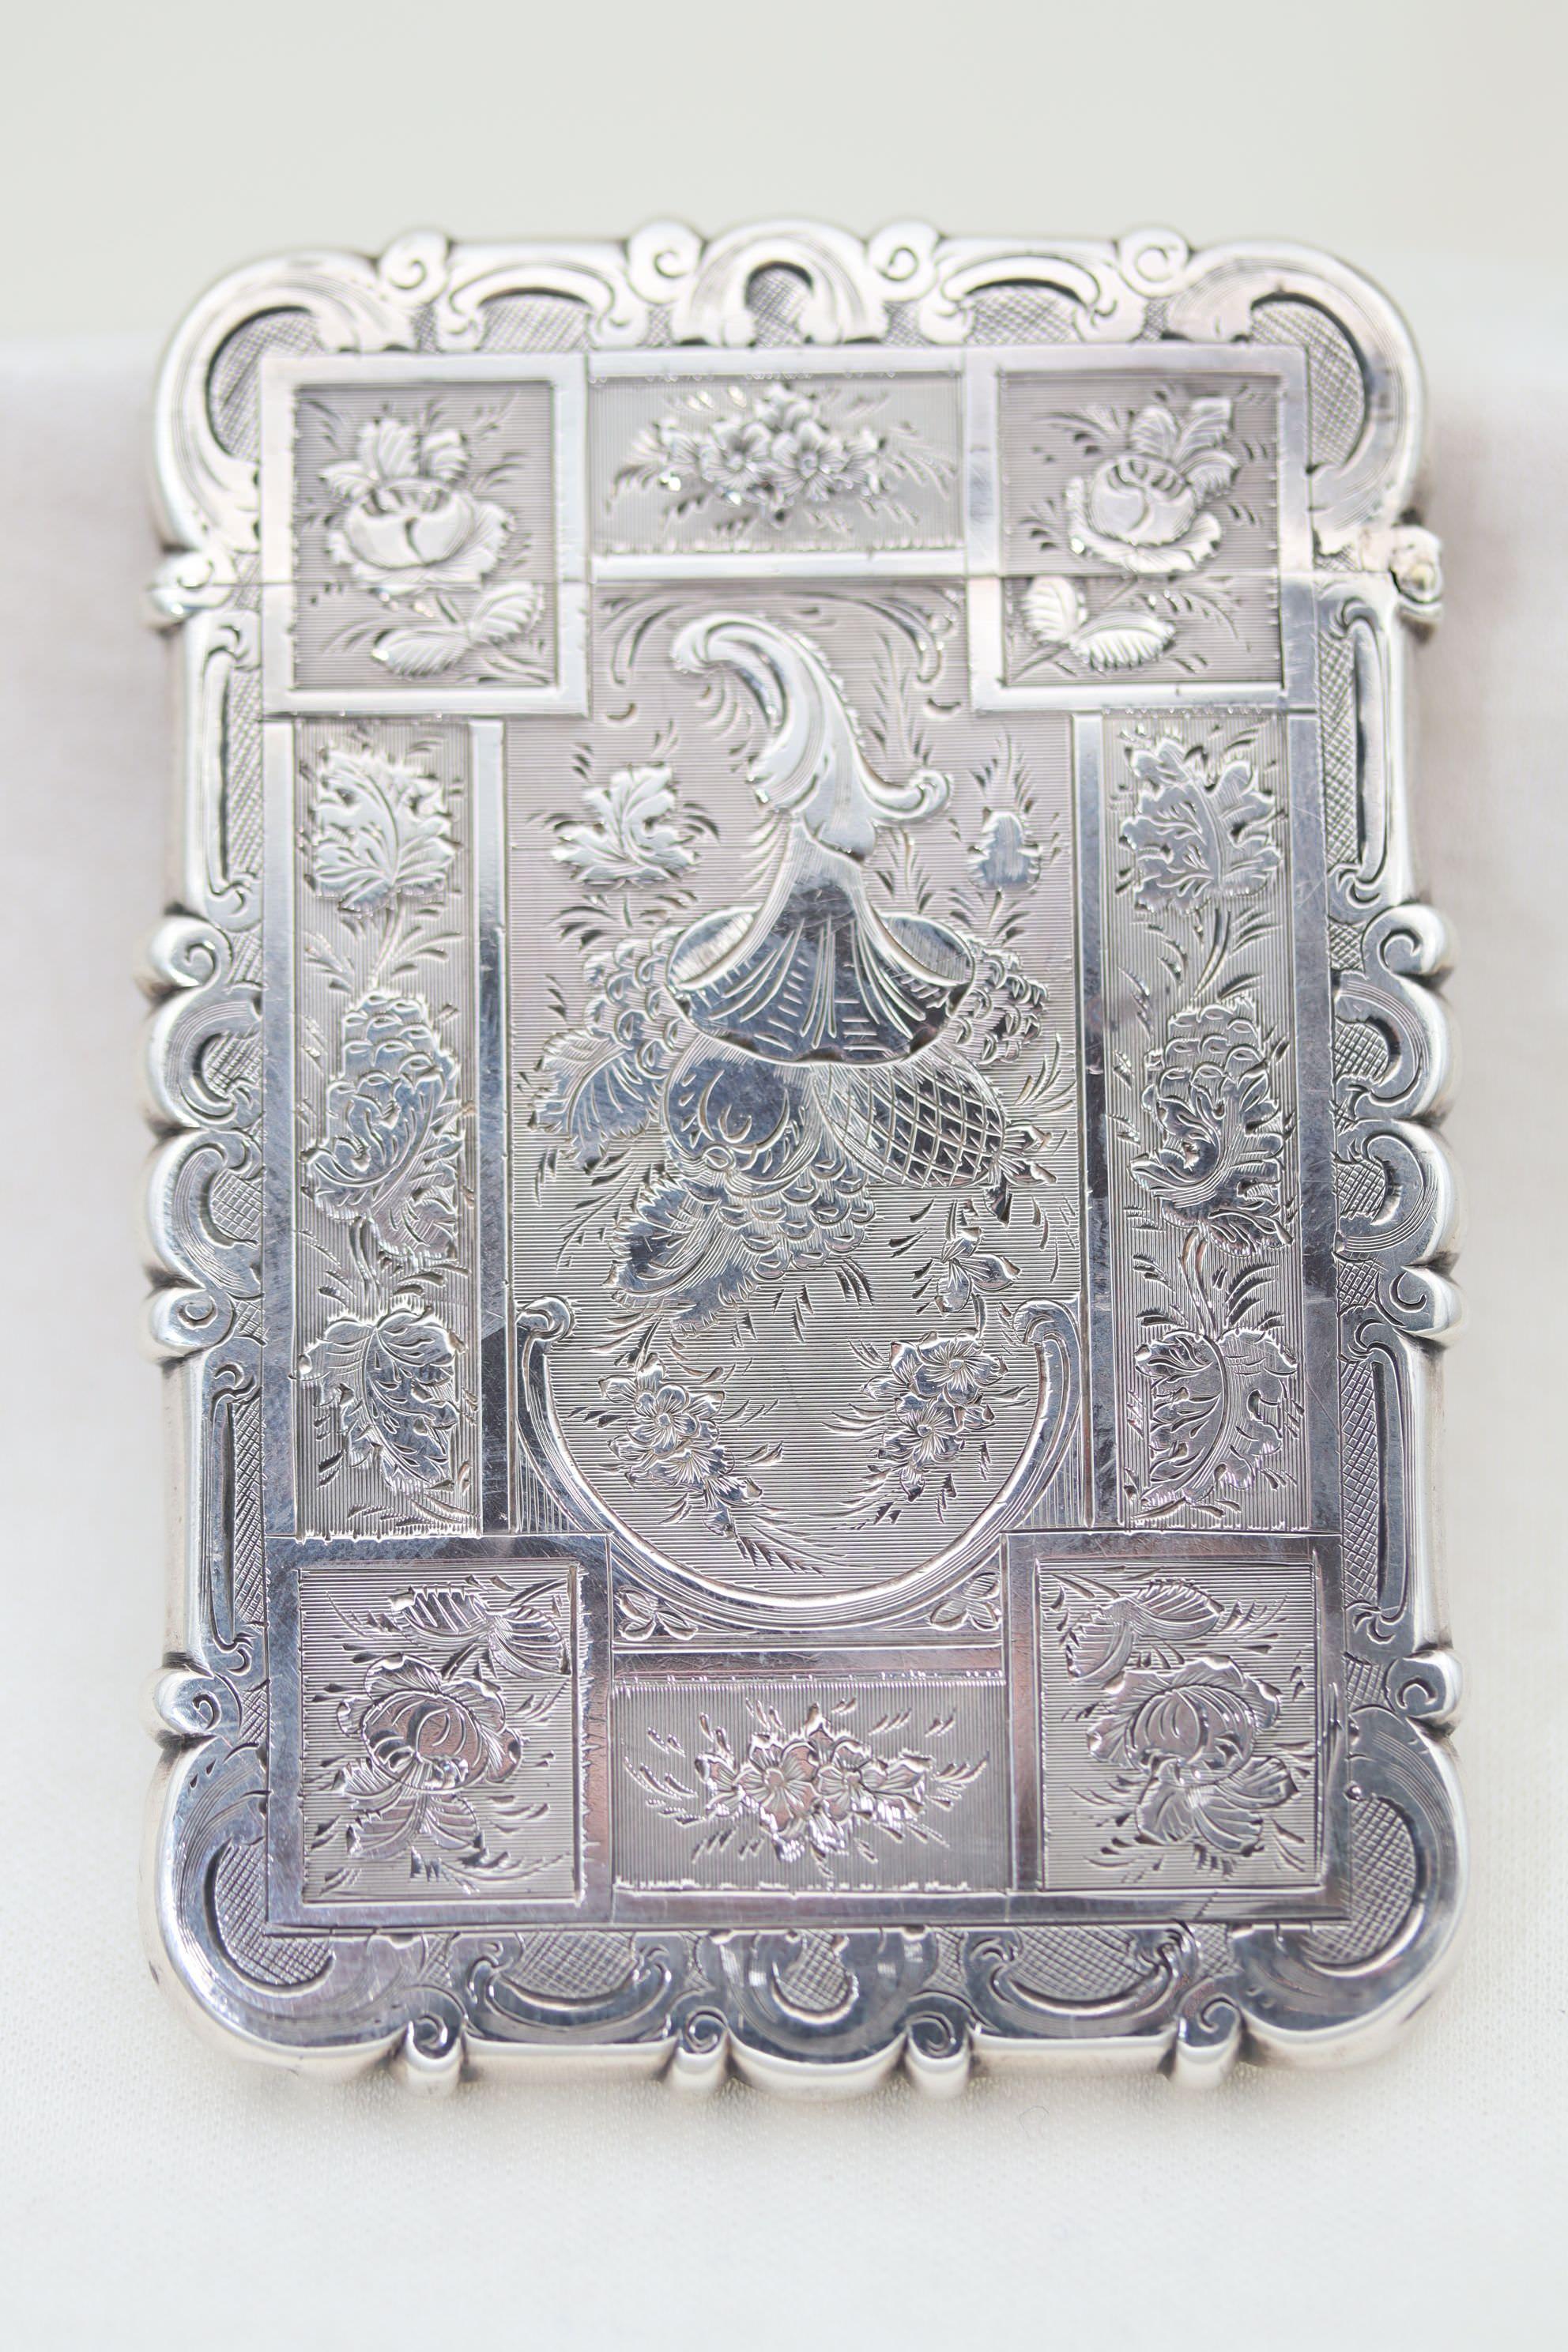 This good quality sterling silver card case was made by Edward Smith of Birmingham in 1854. Both sides are decorated with the same richly engraved pattern where the centre panel features a cornucopia of fruit and the surrounding panels depict